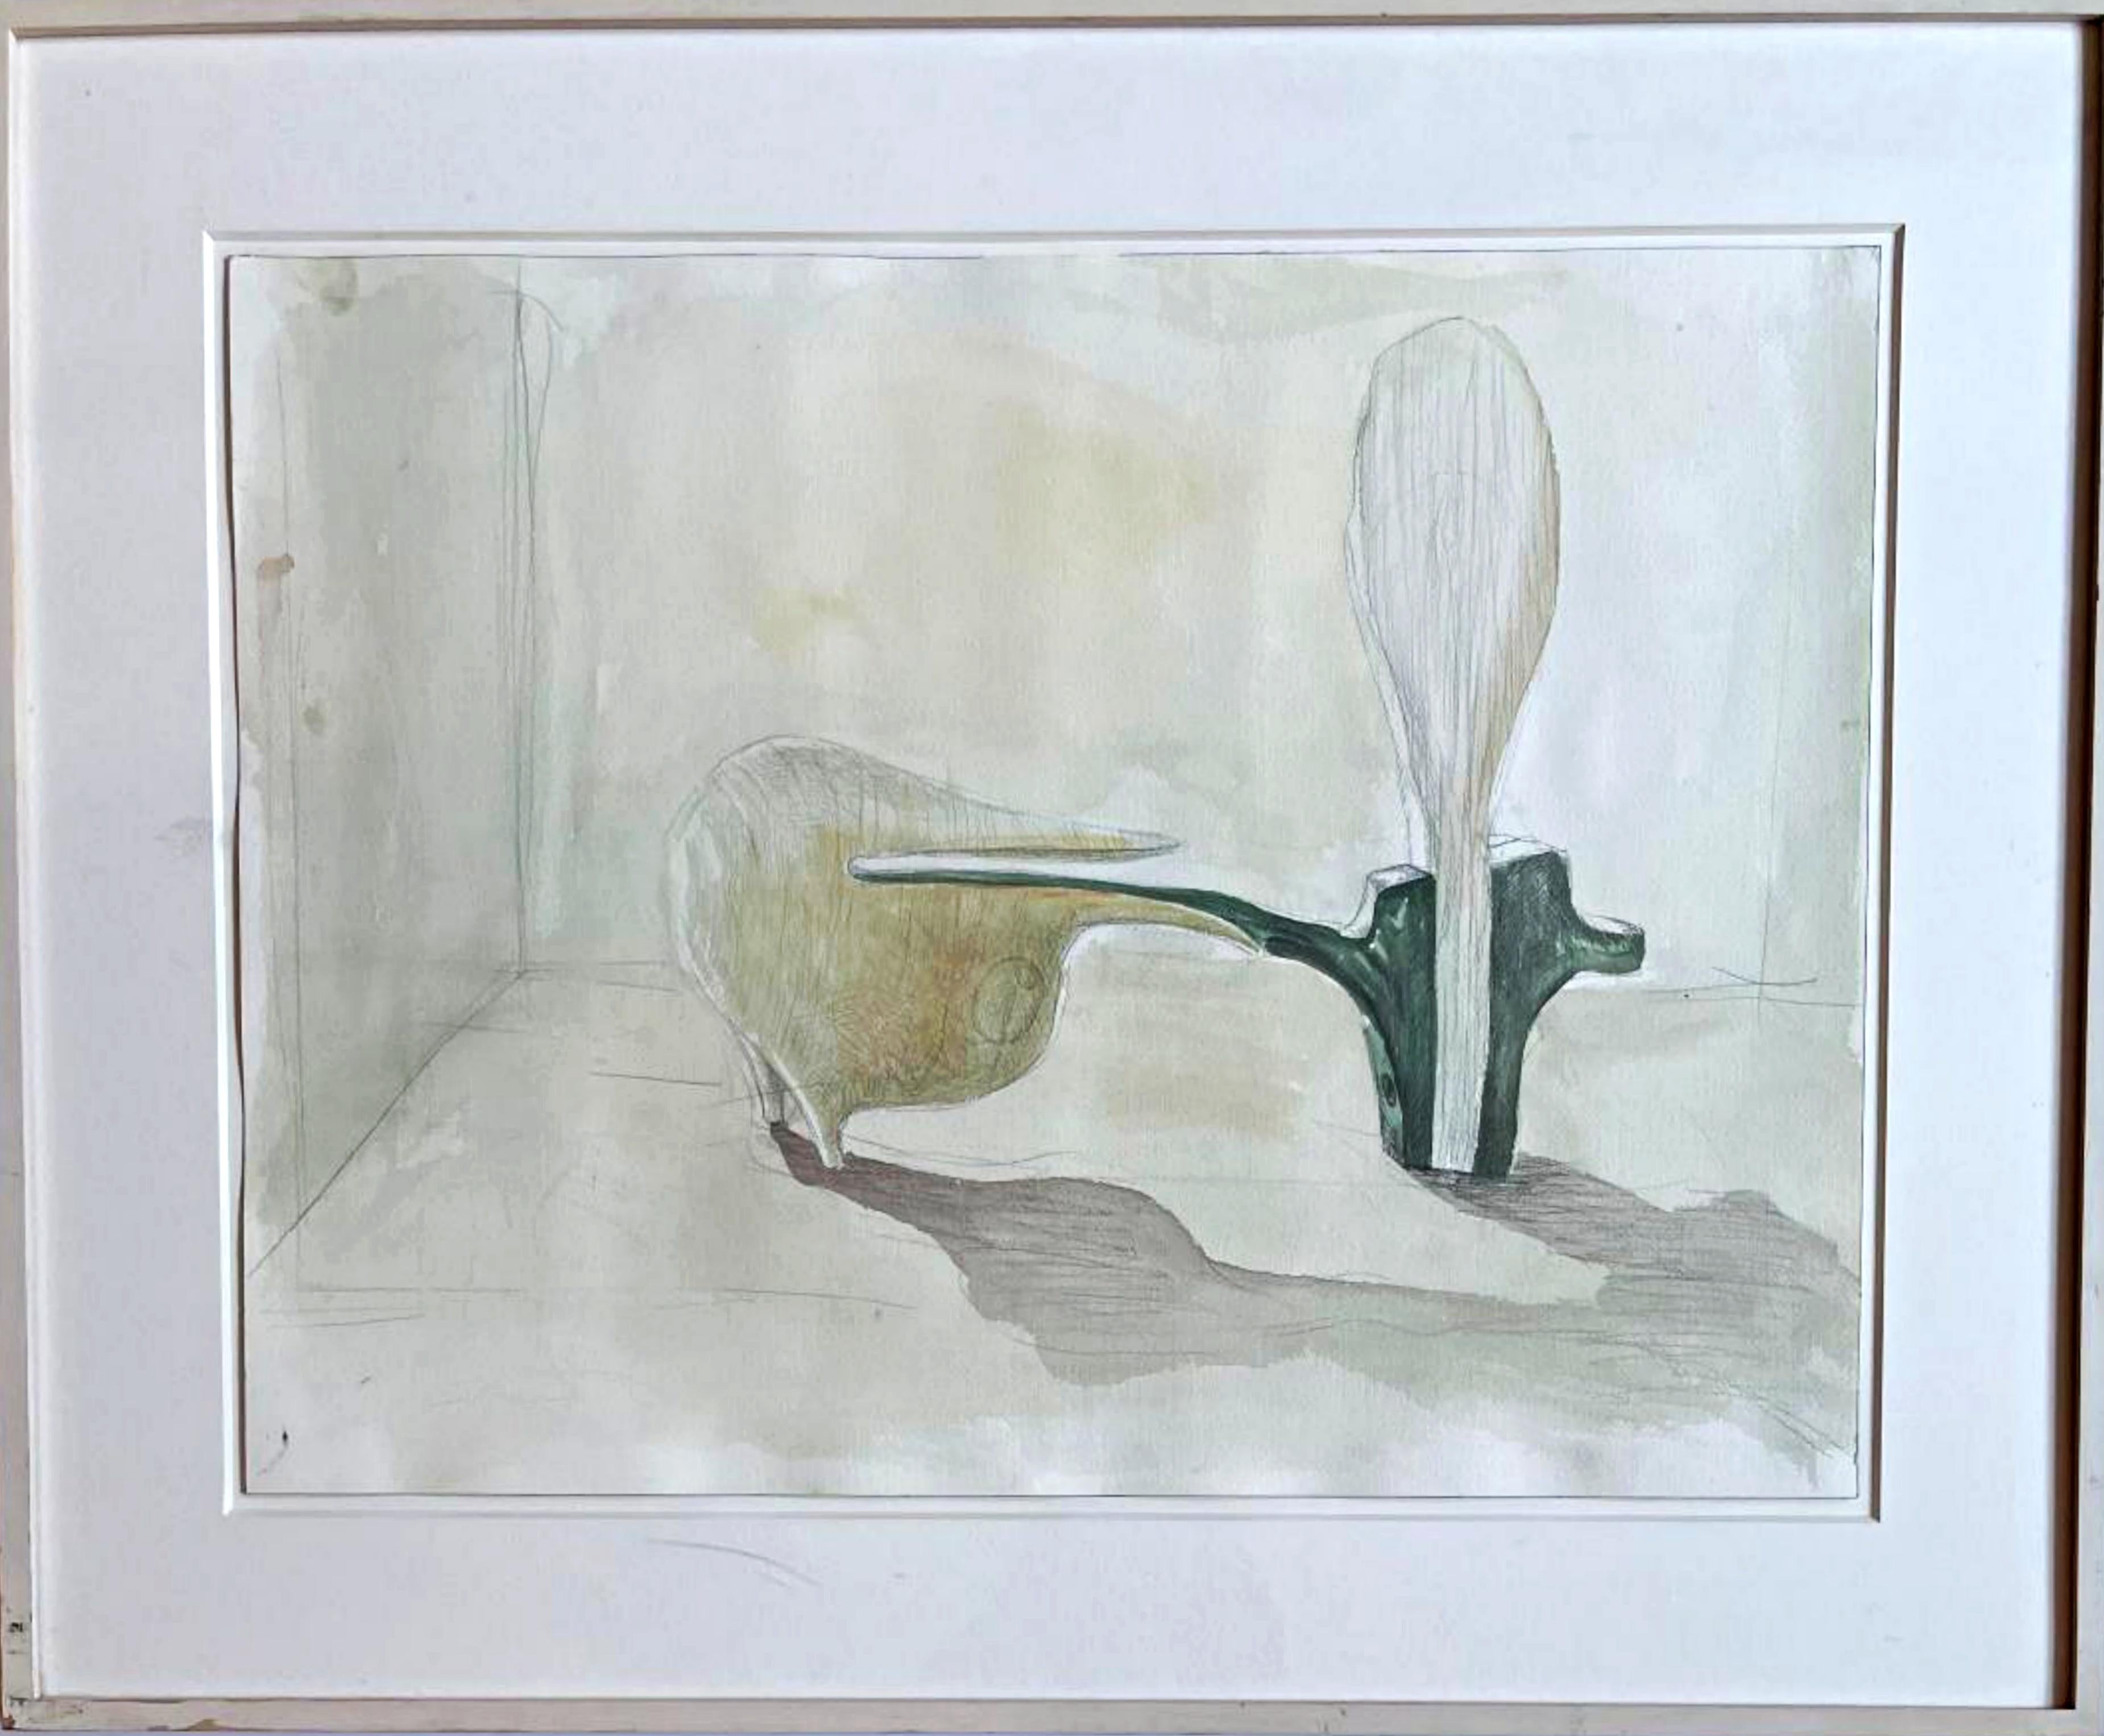 Double Sculpture, unique sculptural study, signed by Brazilian American artist  - Painting by Saint Clair Cemin